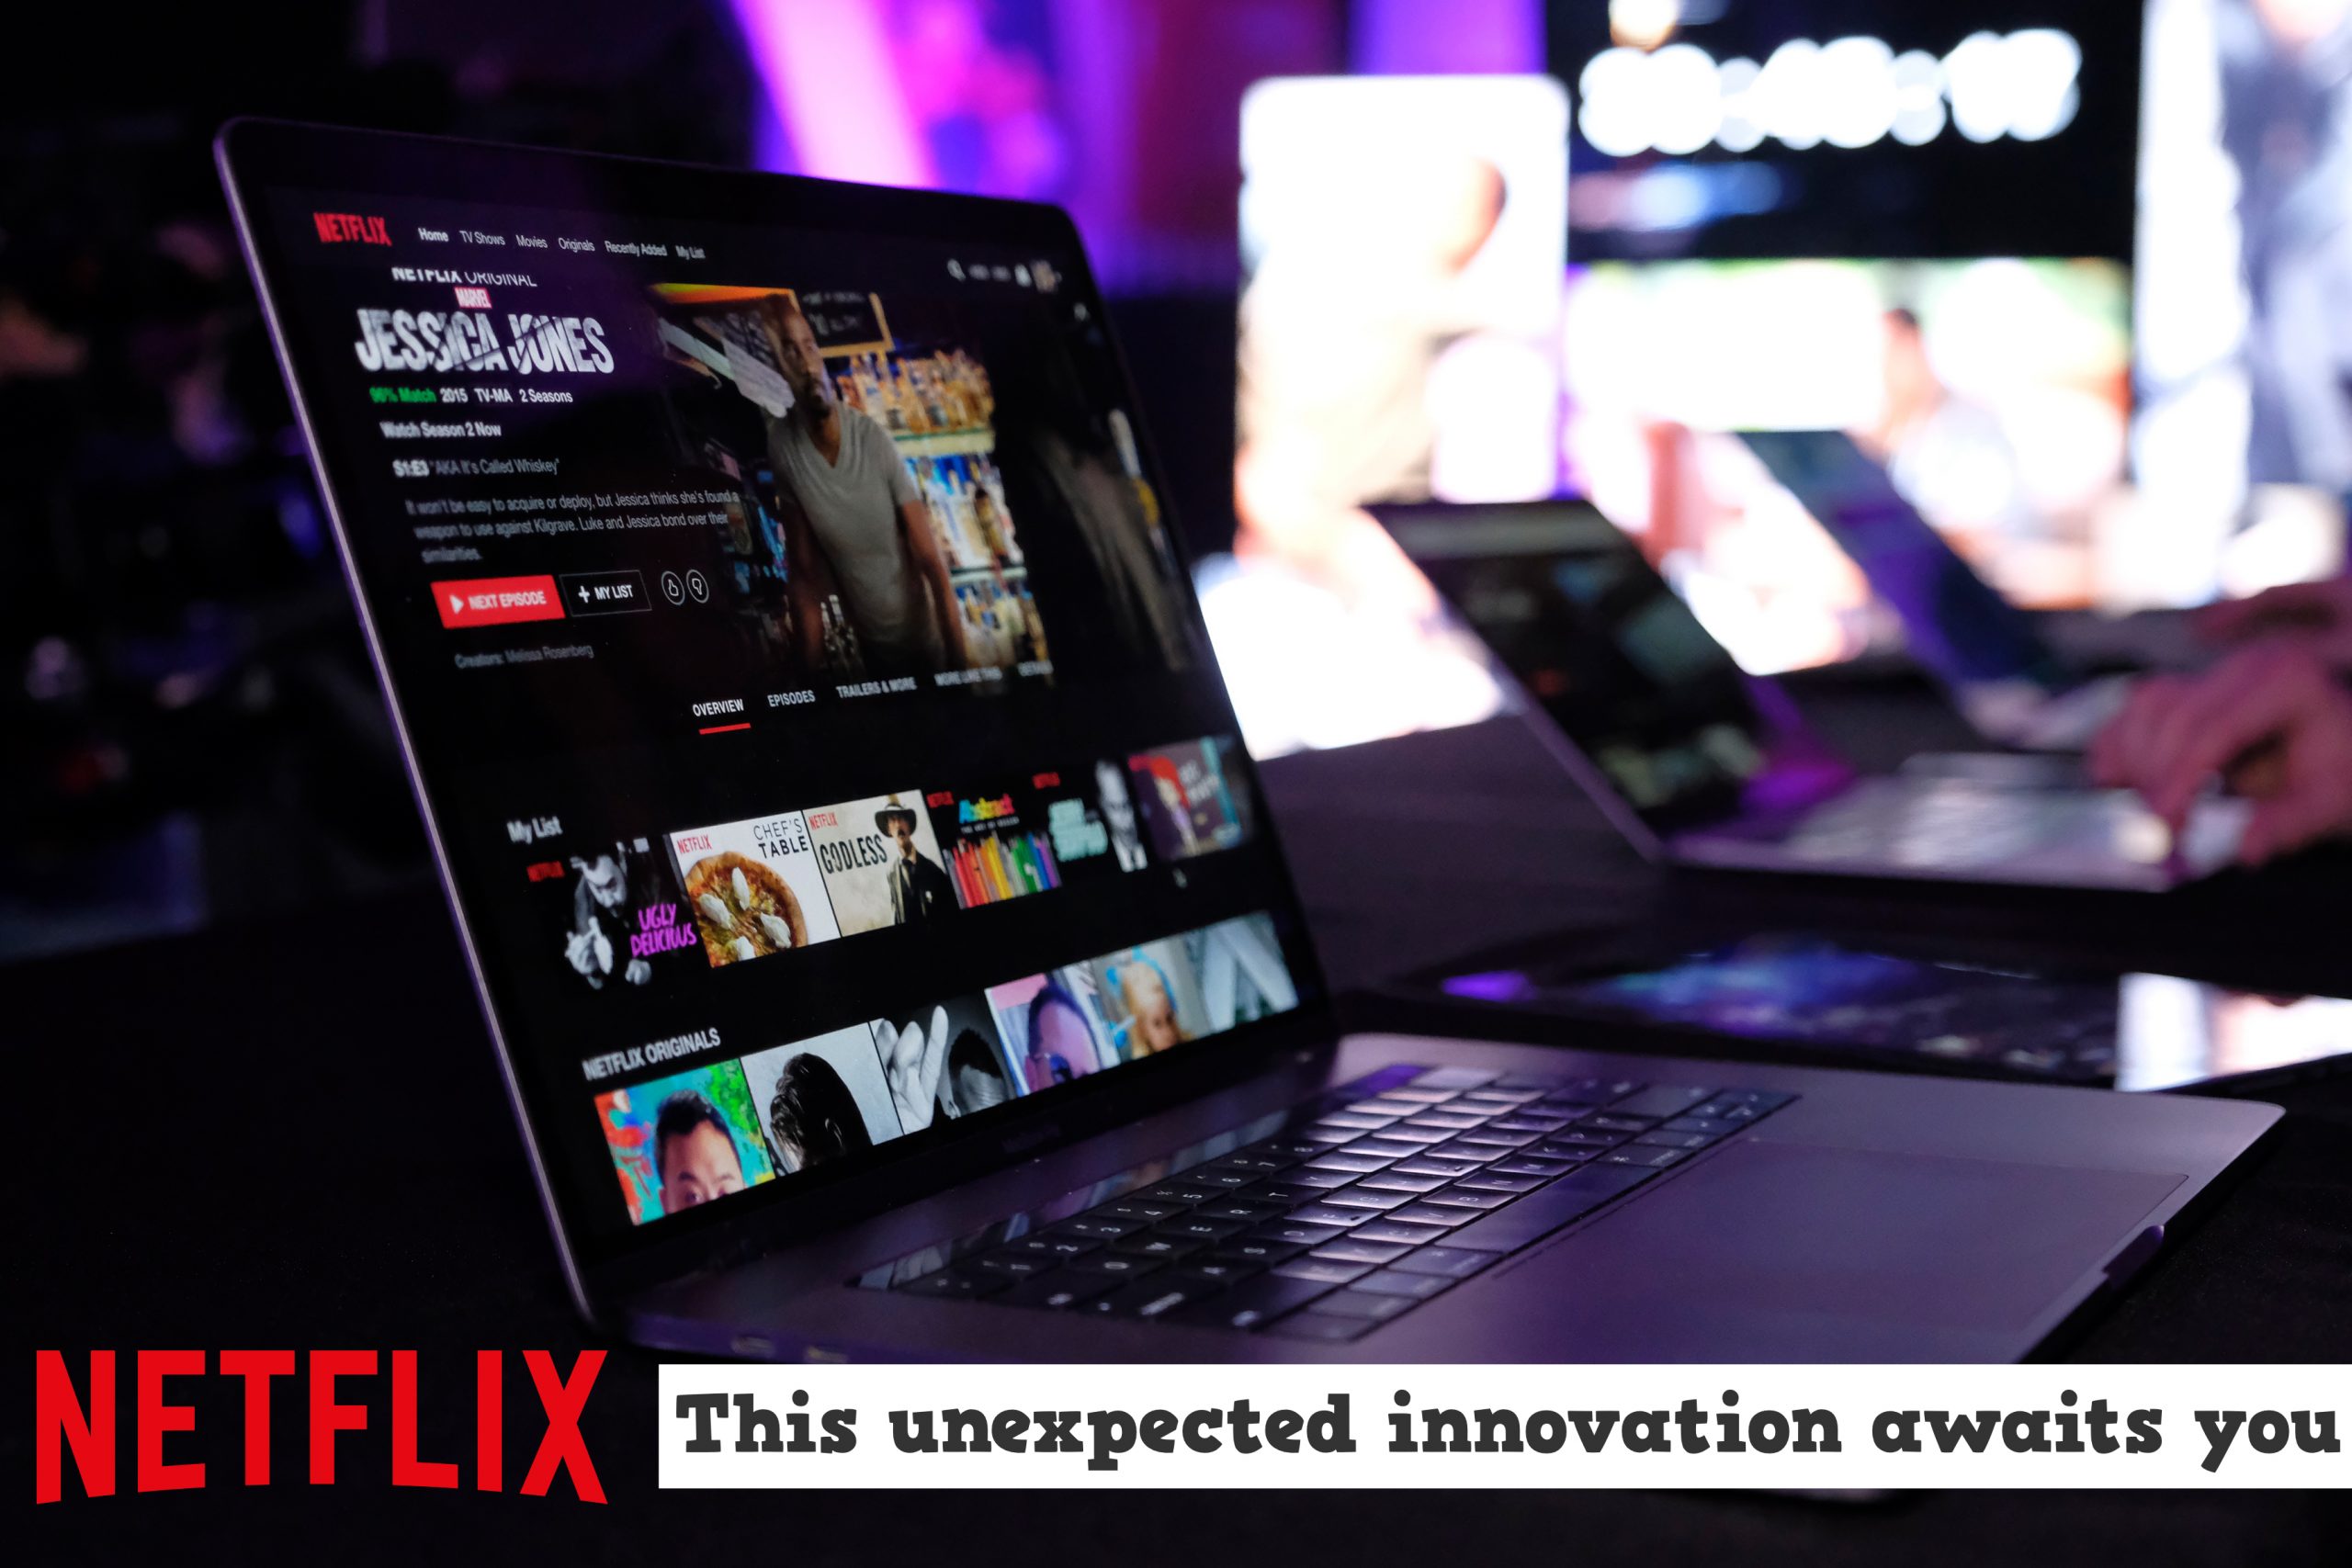 If you want to share Netflix, you can expect a small change to your Netflix subscription.